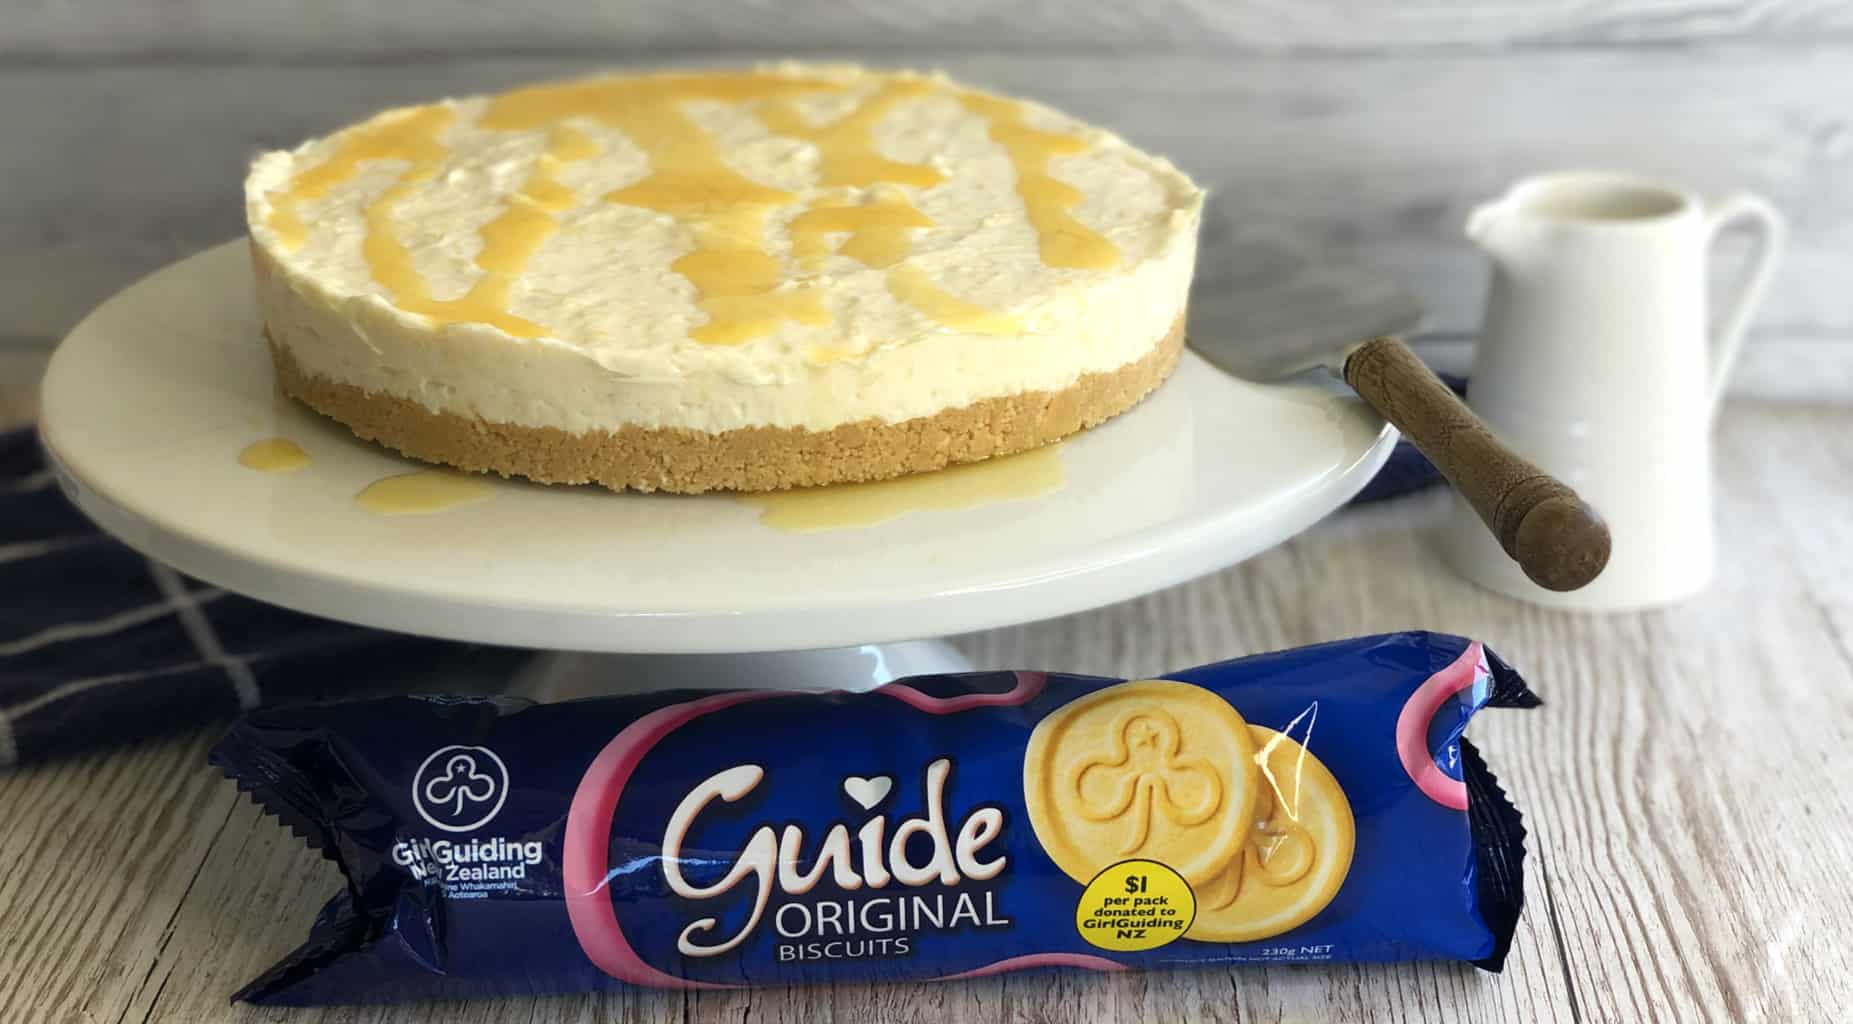 Whole Pineapple Cheesecake on a white cake stand and a packet of Girl Guide Biscuits 